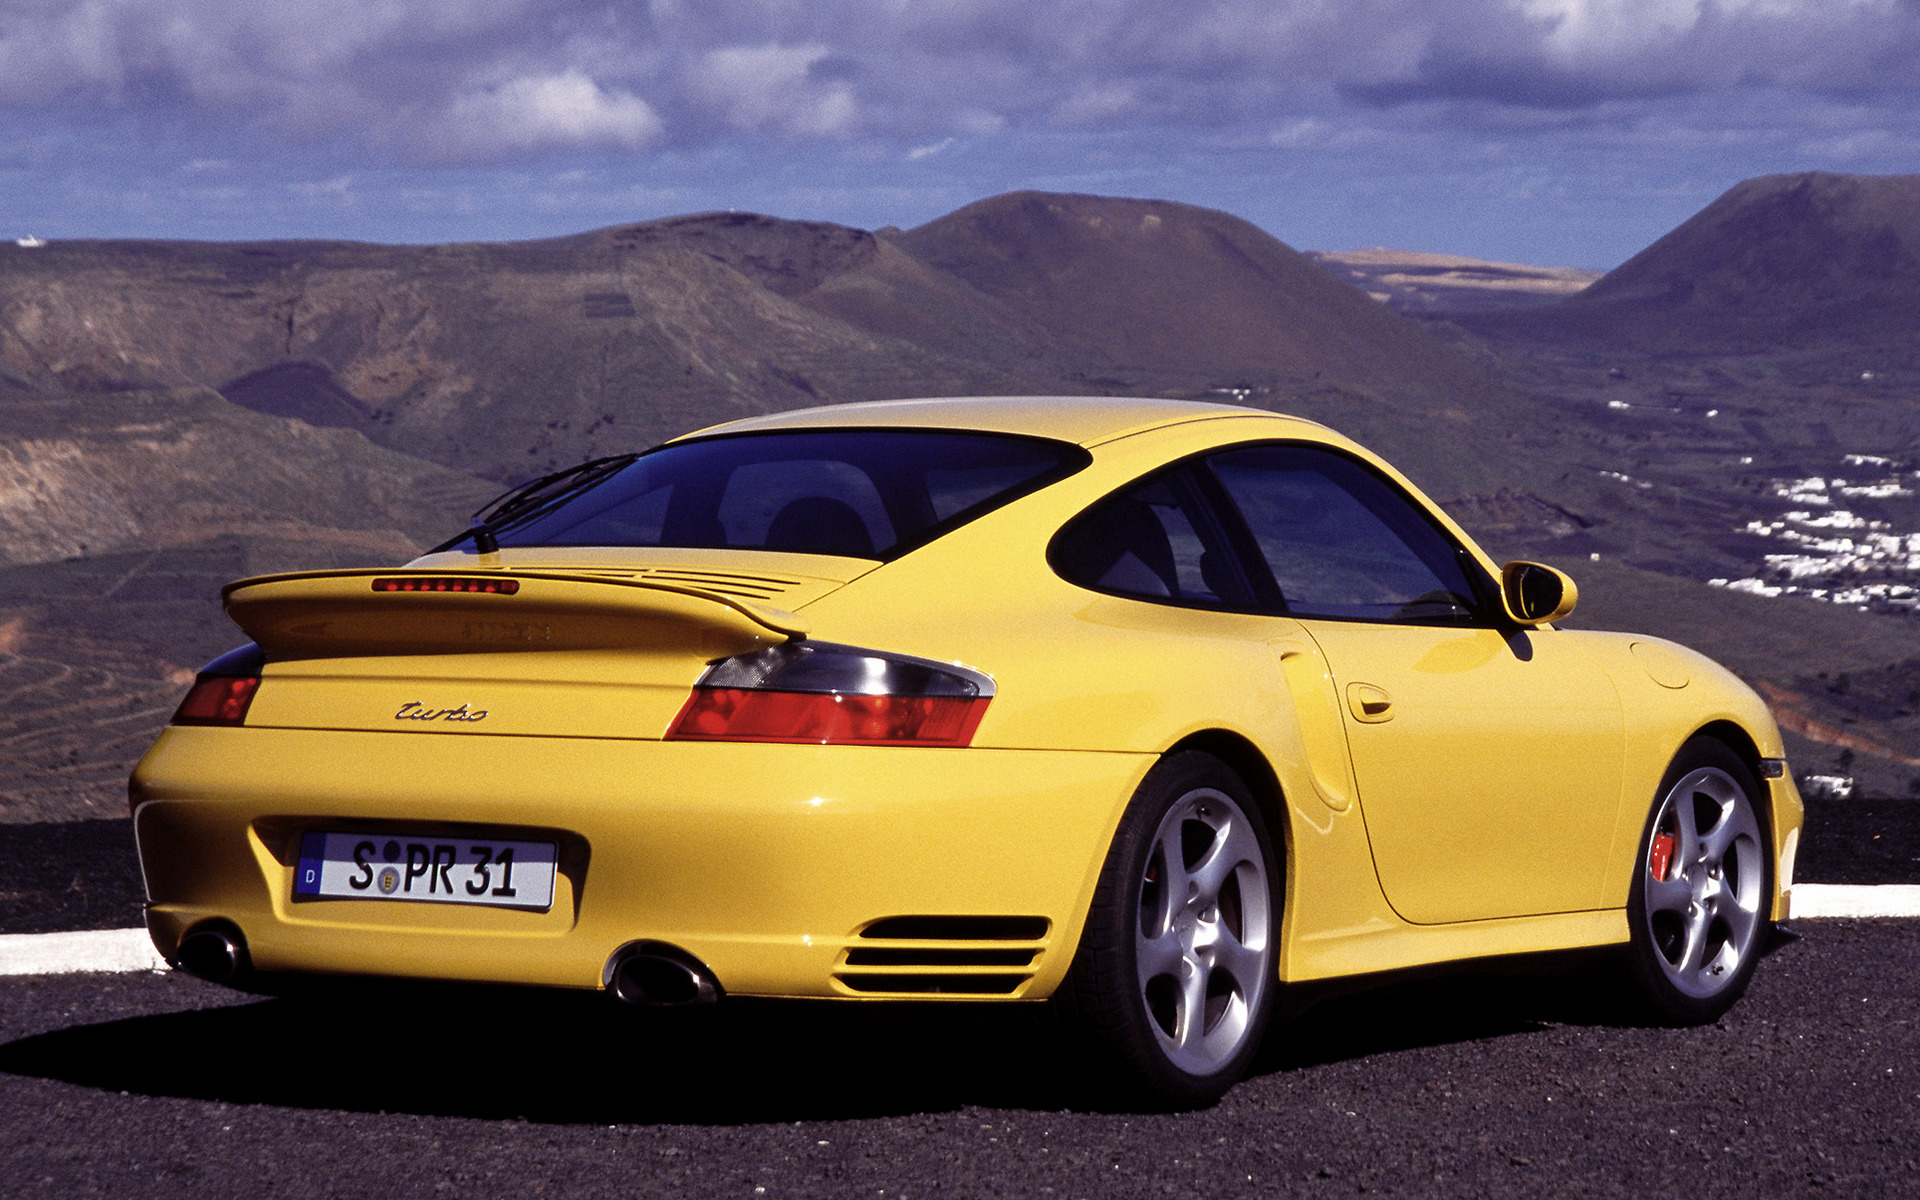 2000 Porsche 911 Turbo - Wallpapers and HD Images | Car Pixel